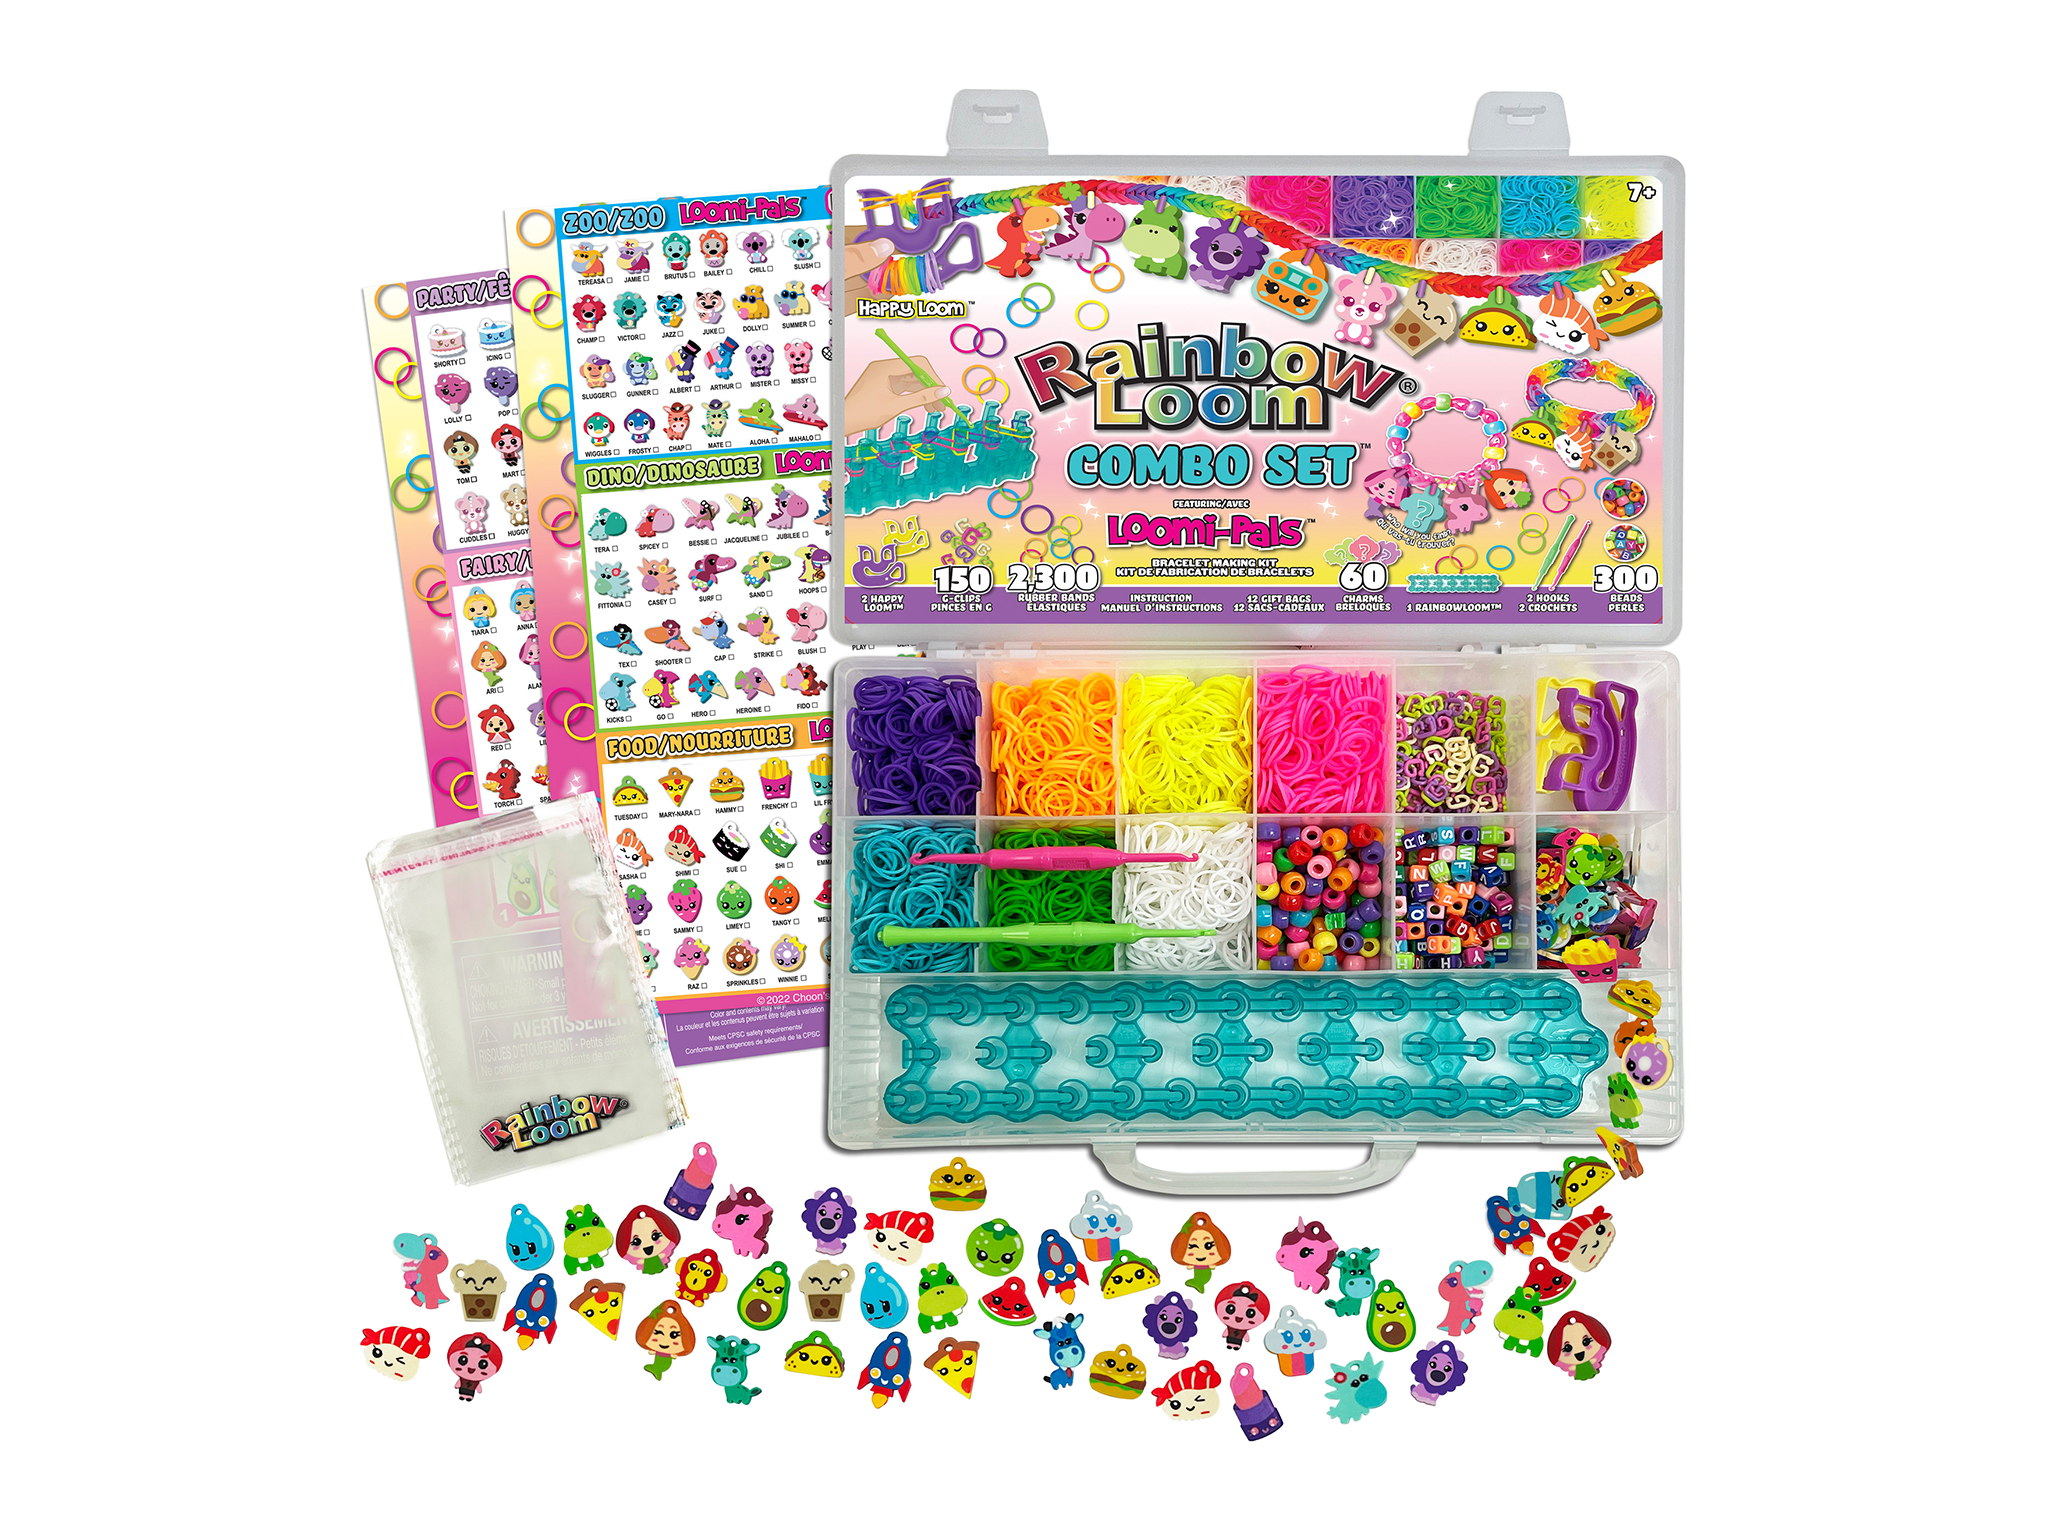 Rainbow loom loomi-pals collectibles pack